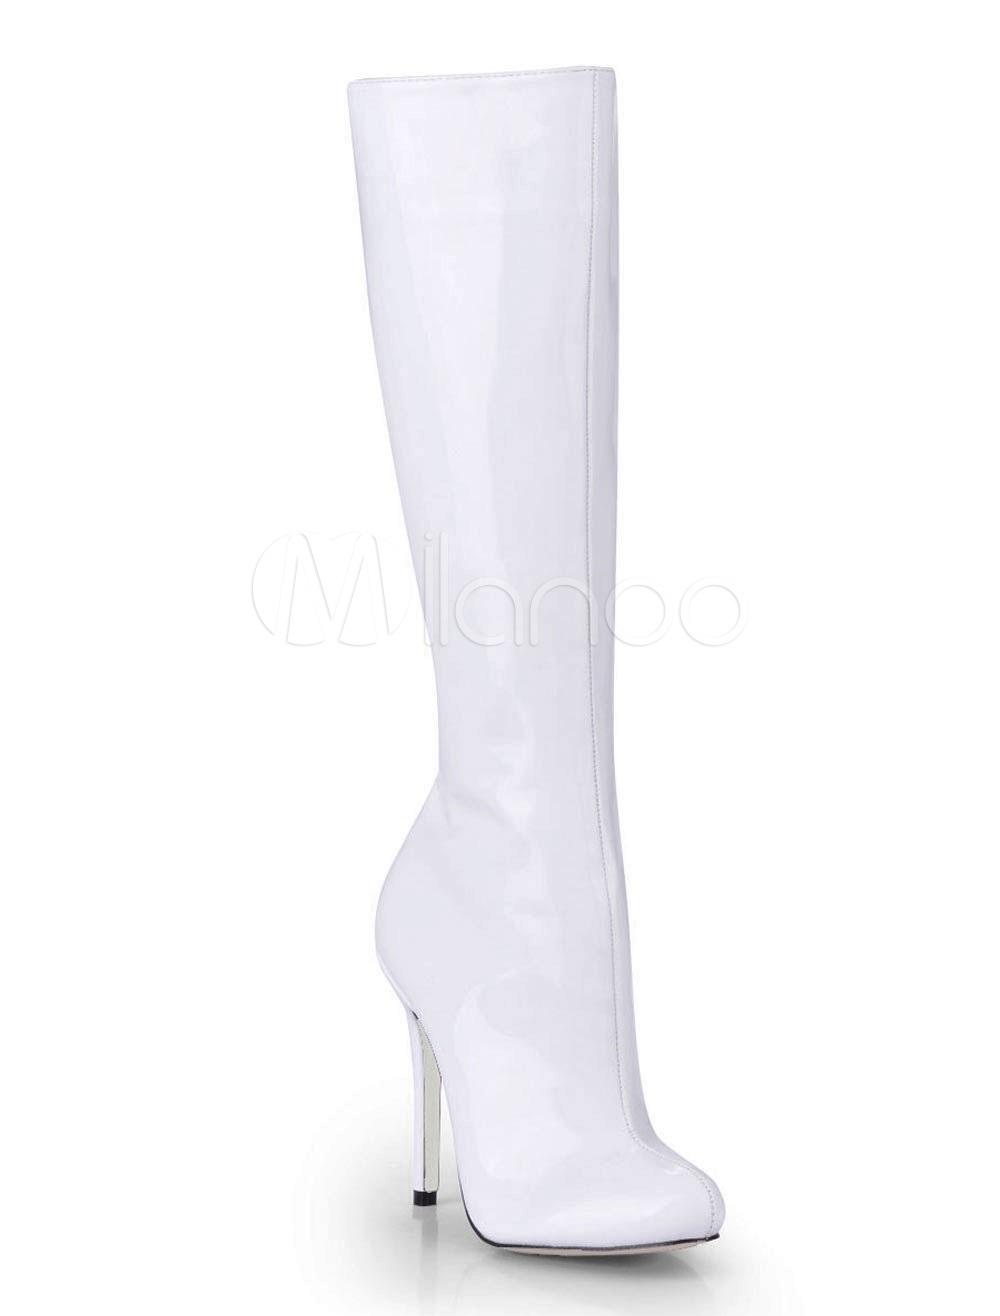 white patent leather knee high boots